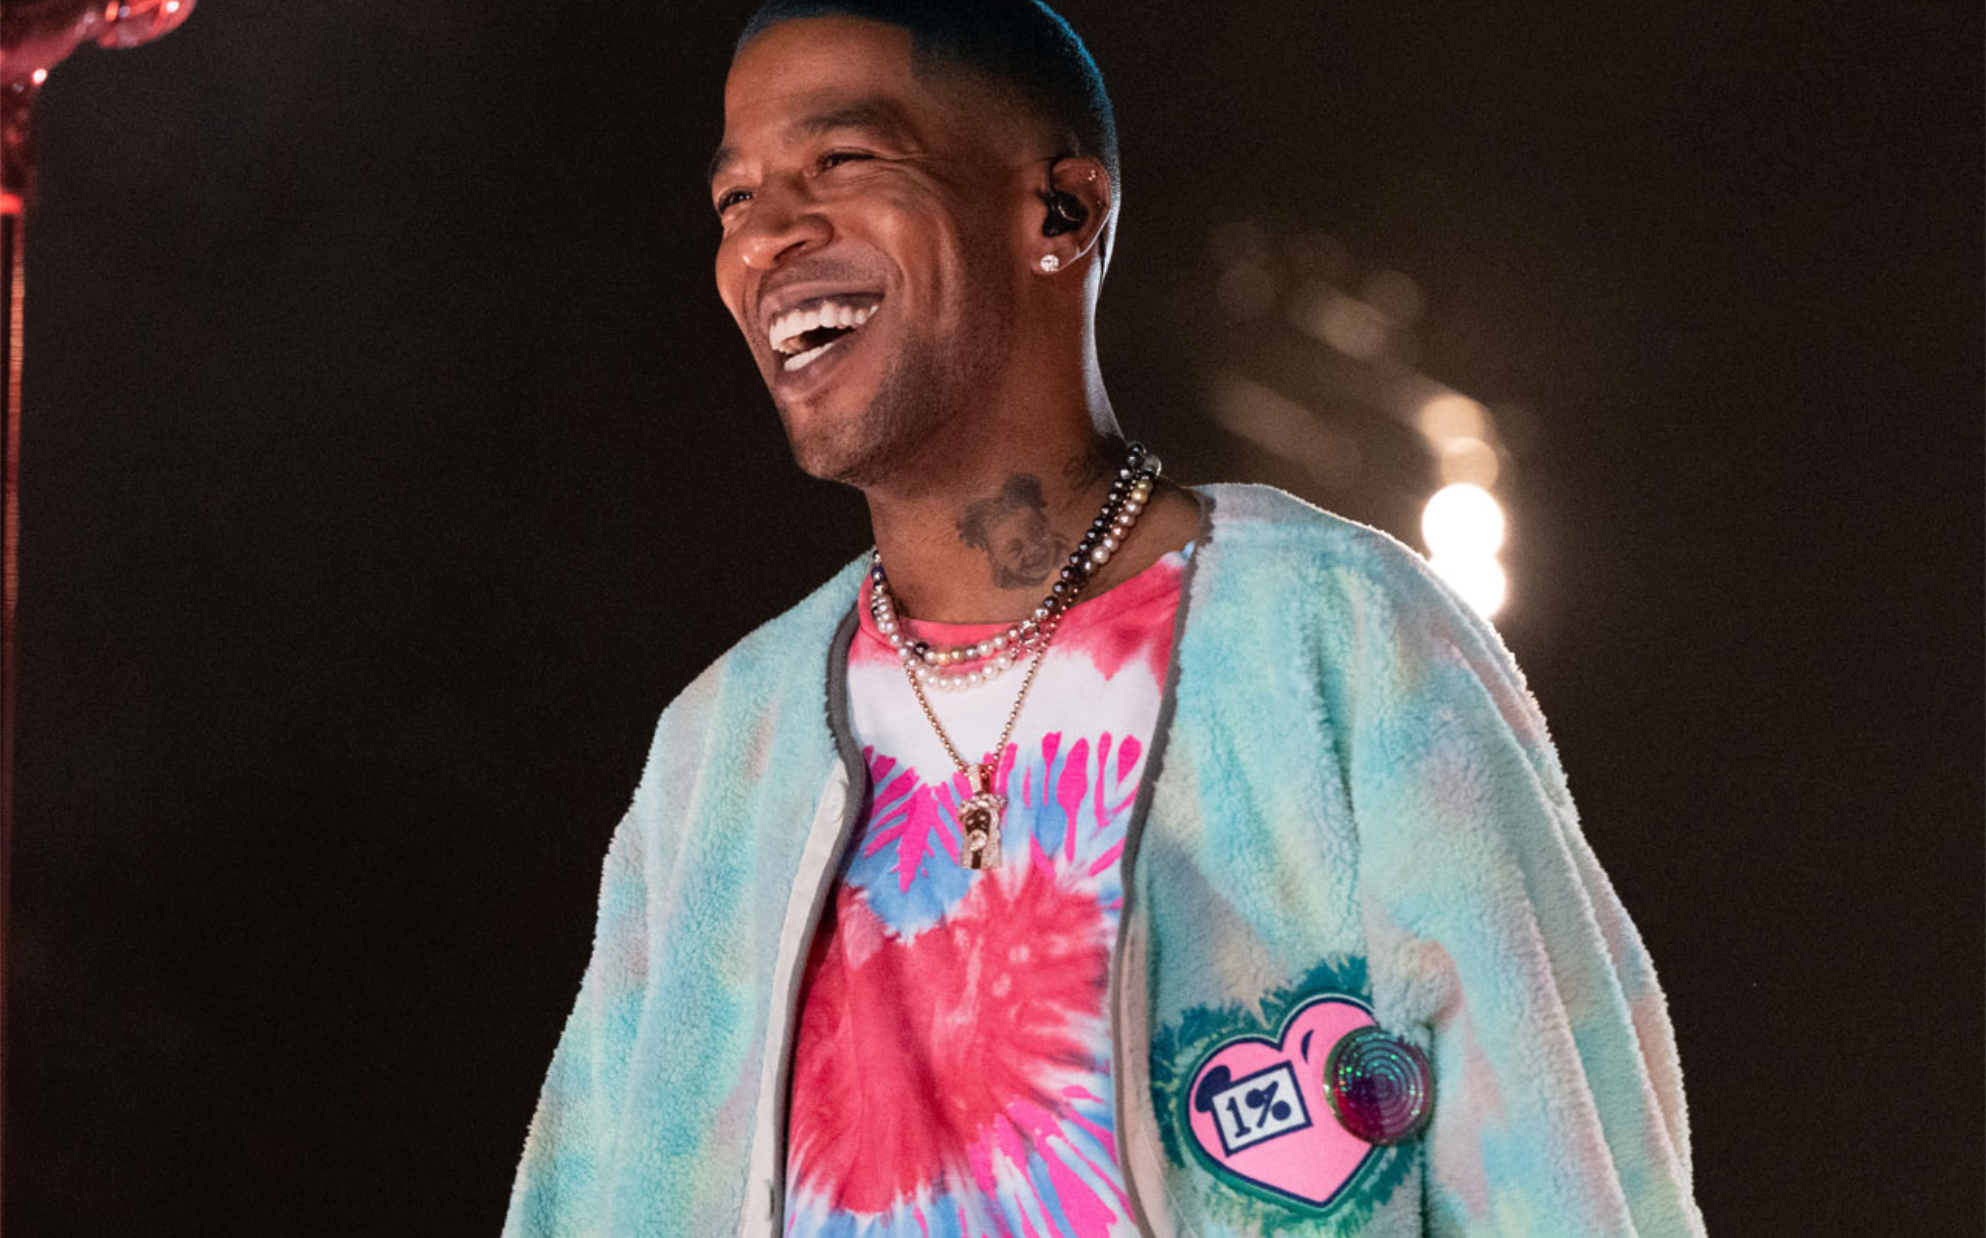 KID CUDI CONFIRMS HE WILL RELEASE TWO NEW ALBUMS IN 2022